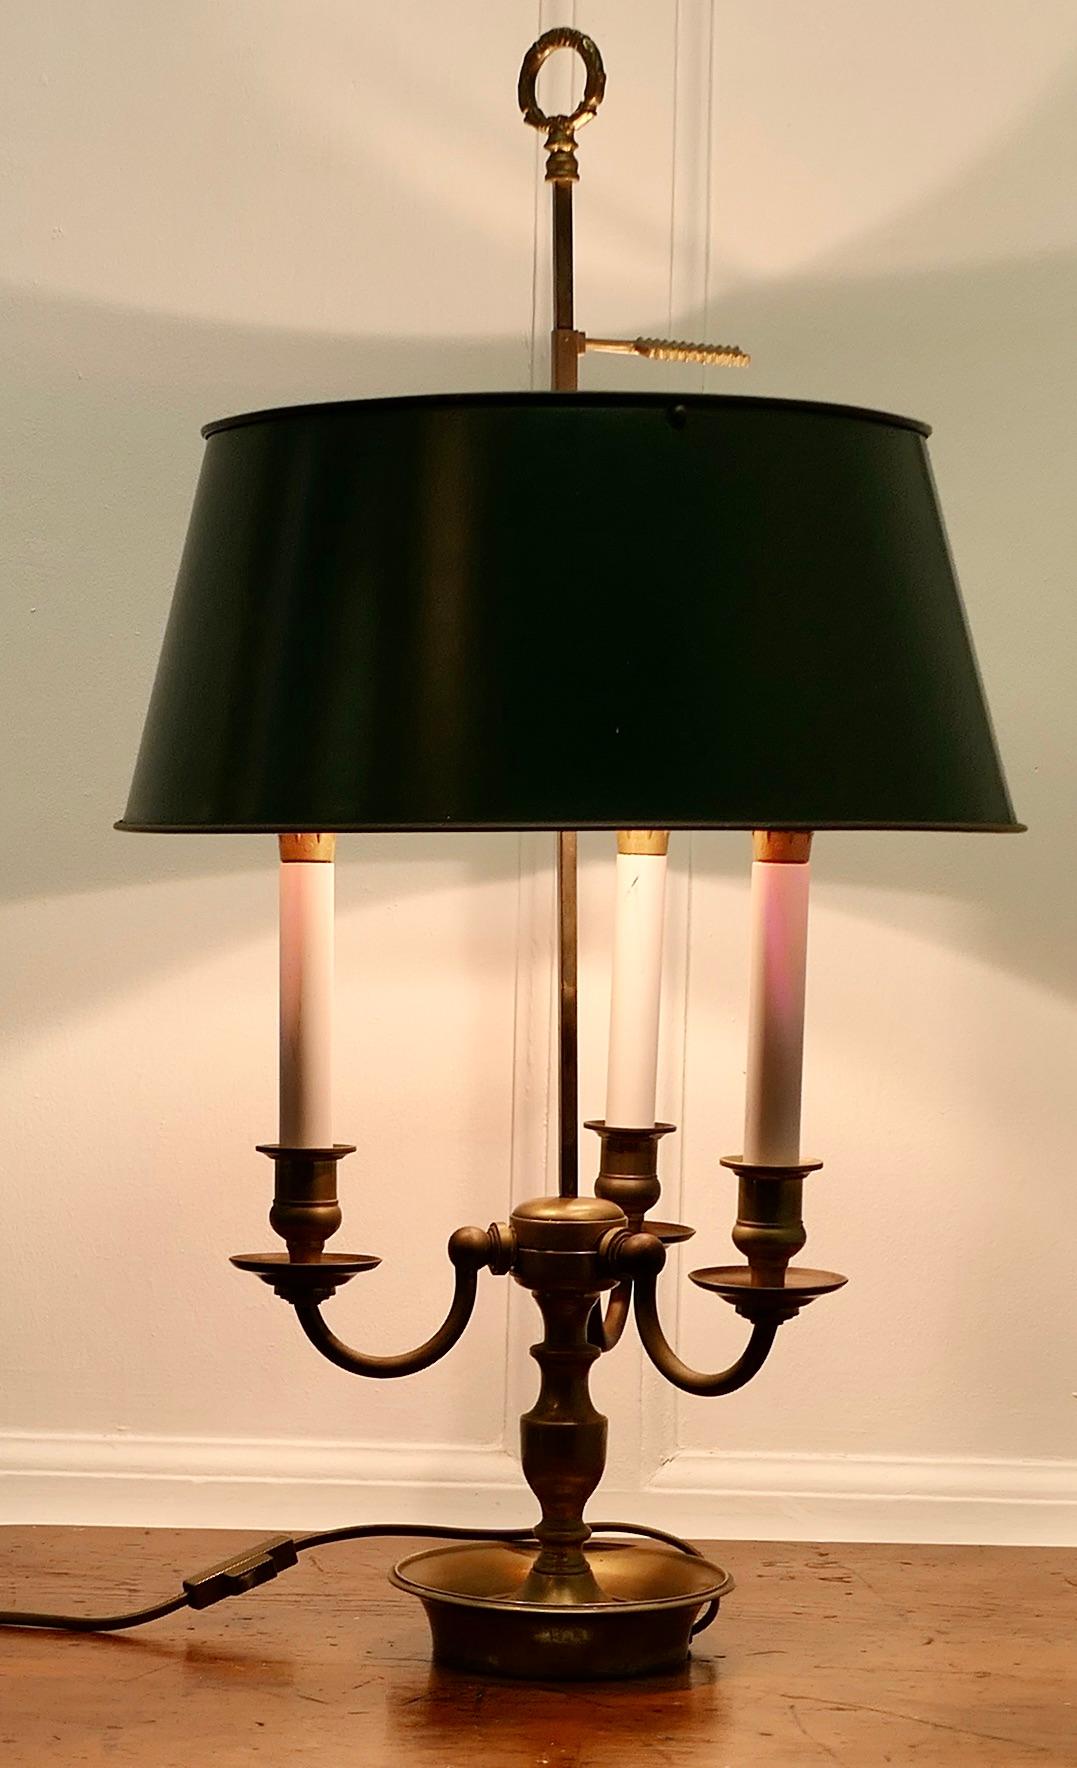 French Painted Toleware and Brass Triple Desk Lamp

A lovely piece, a brass triple sconce lamp with its original adjustable toleware shade 
A Very Traditional Design with three candles and the arrow shaped grip to adjust the shade
The shade is